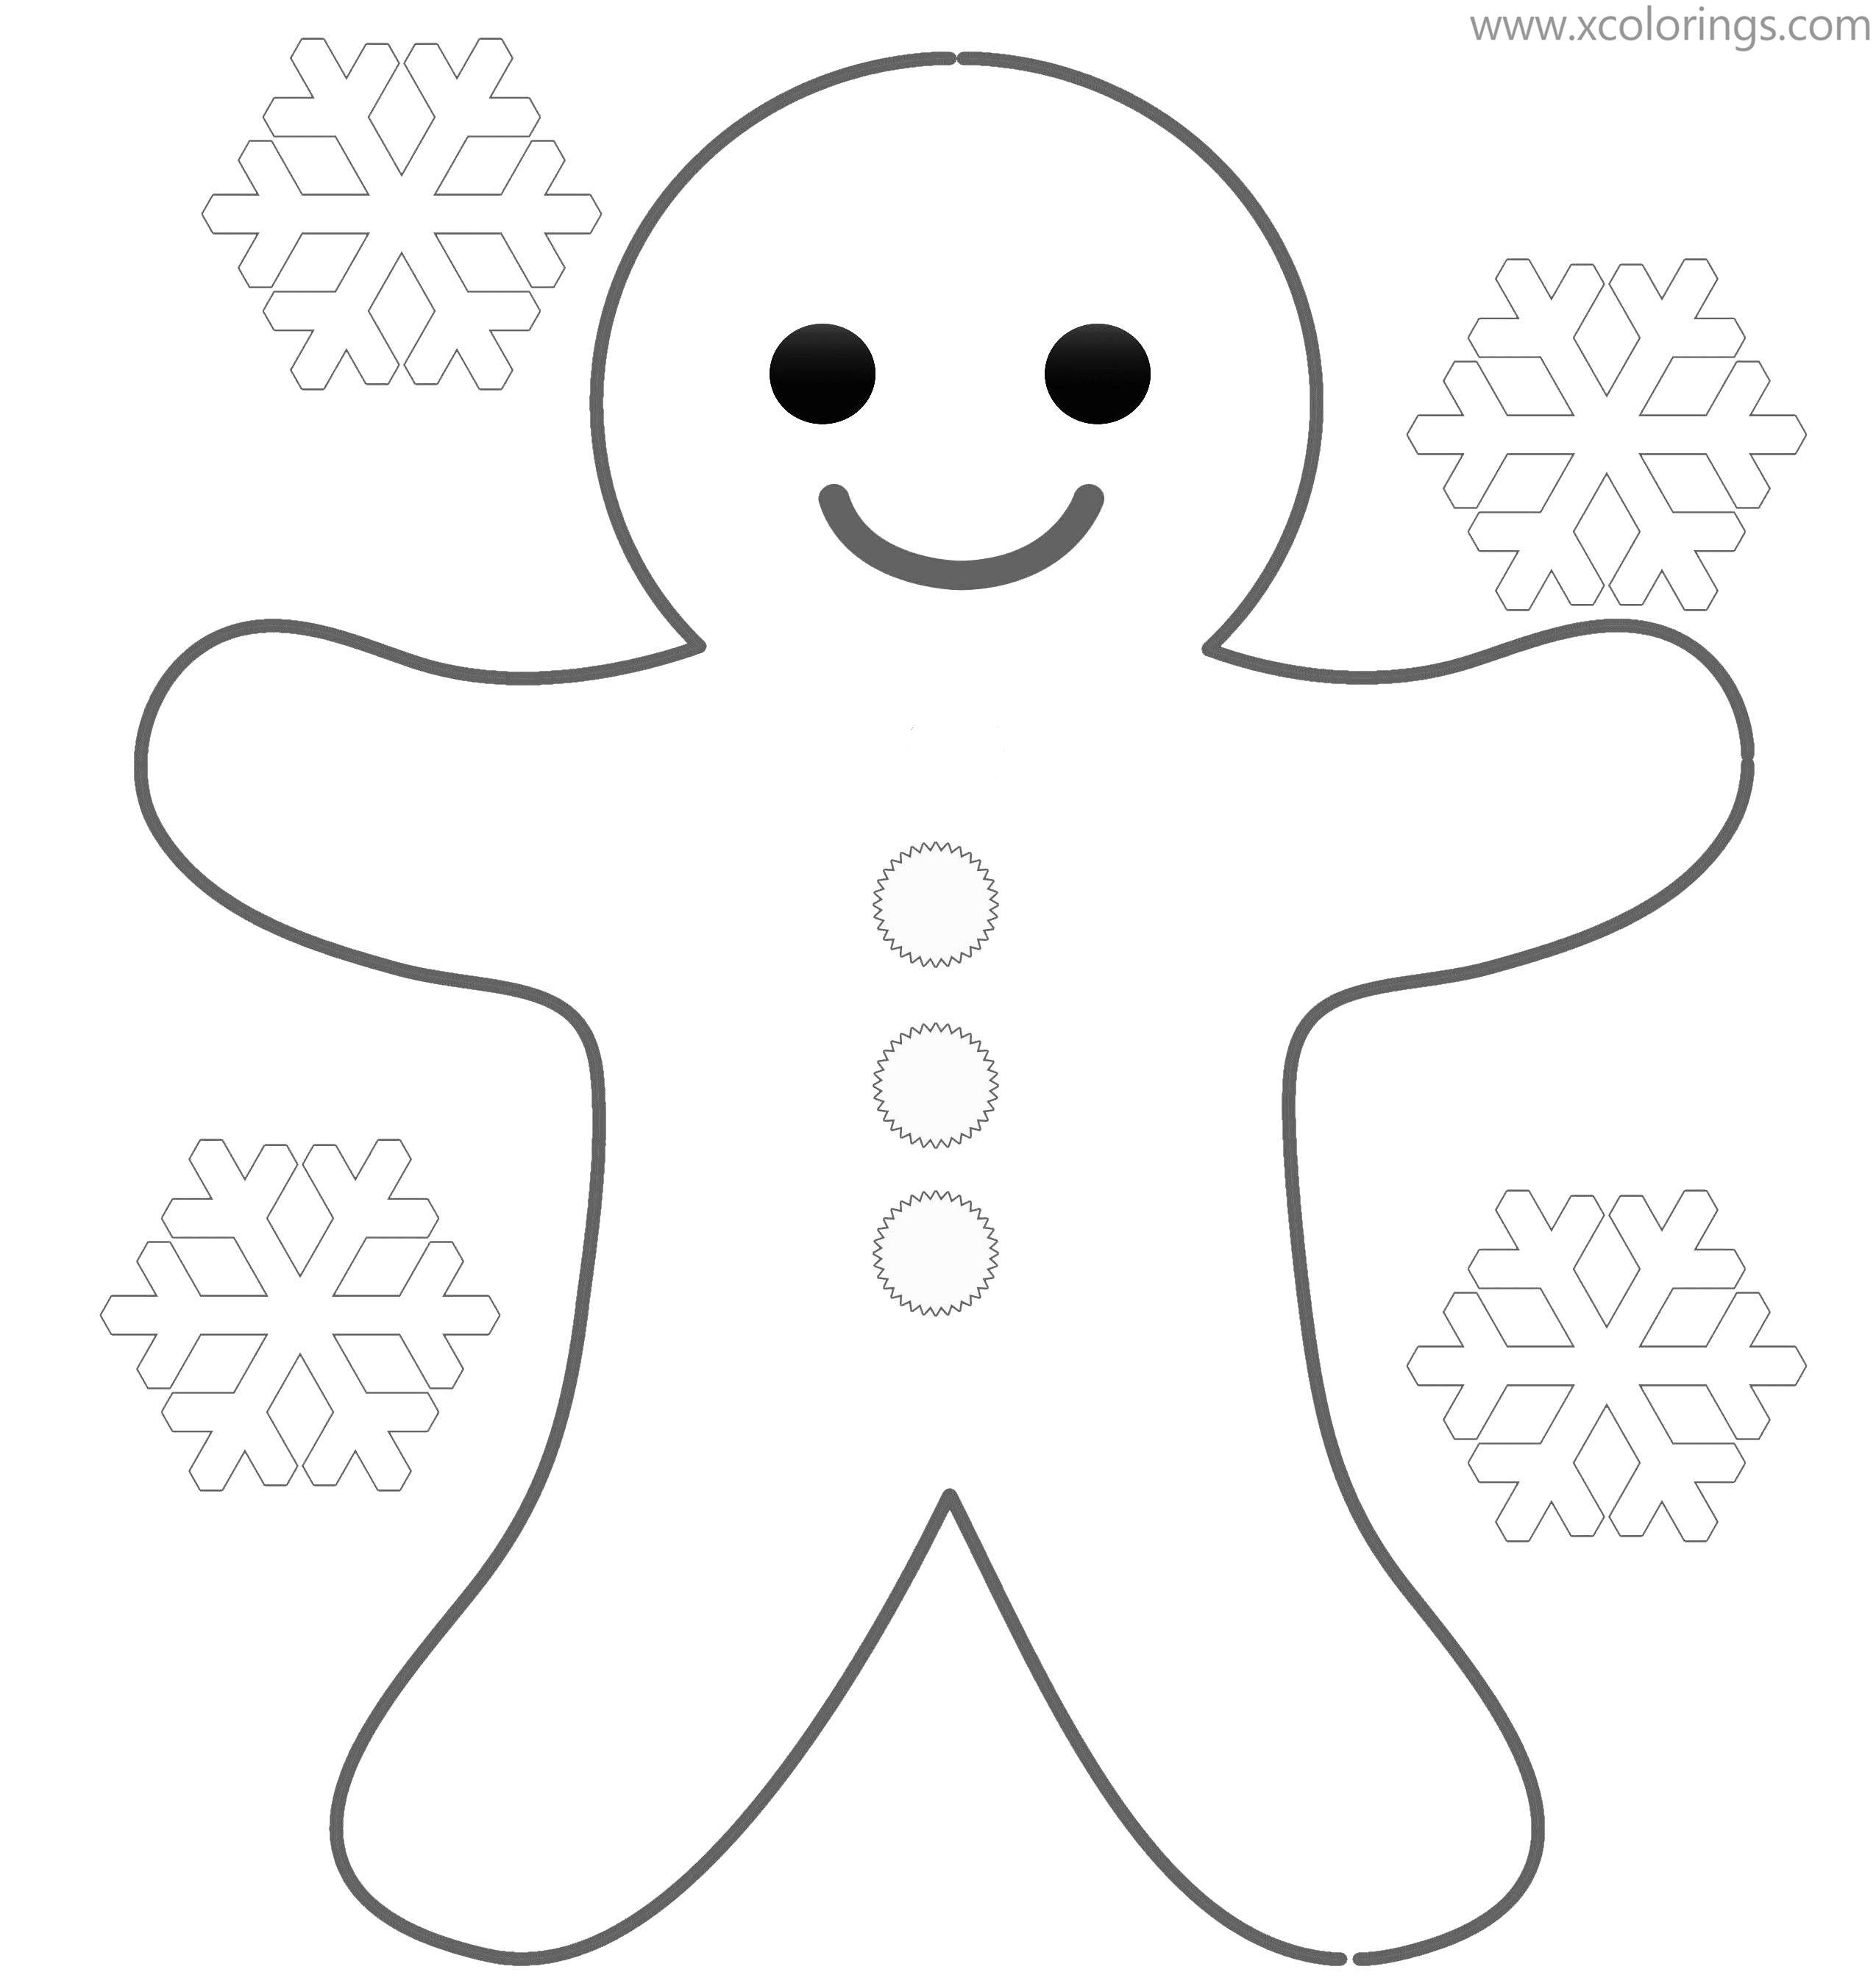 Free Gingerbread Man and Snowflakes Coloring Pages printable